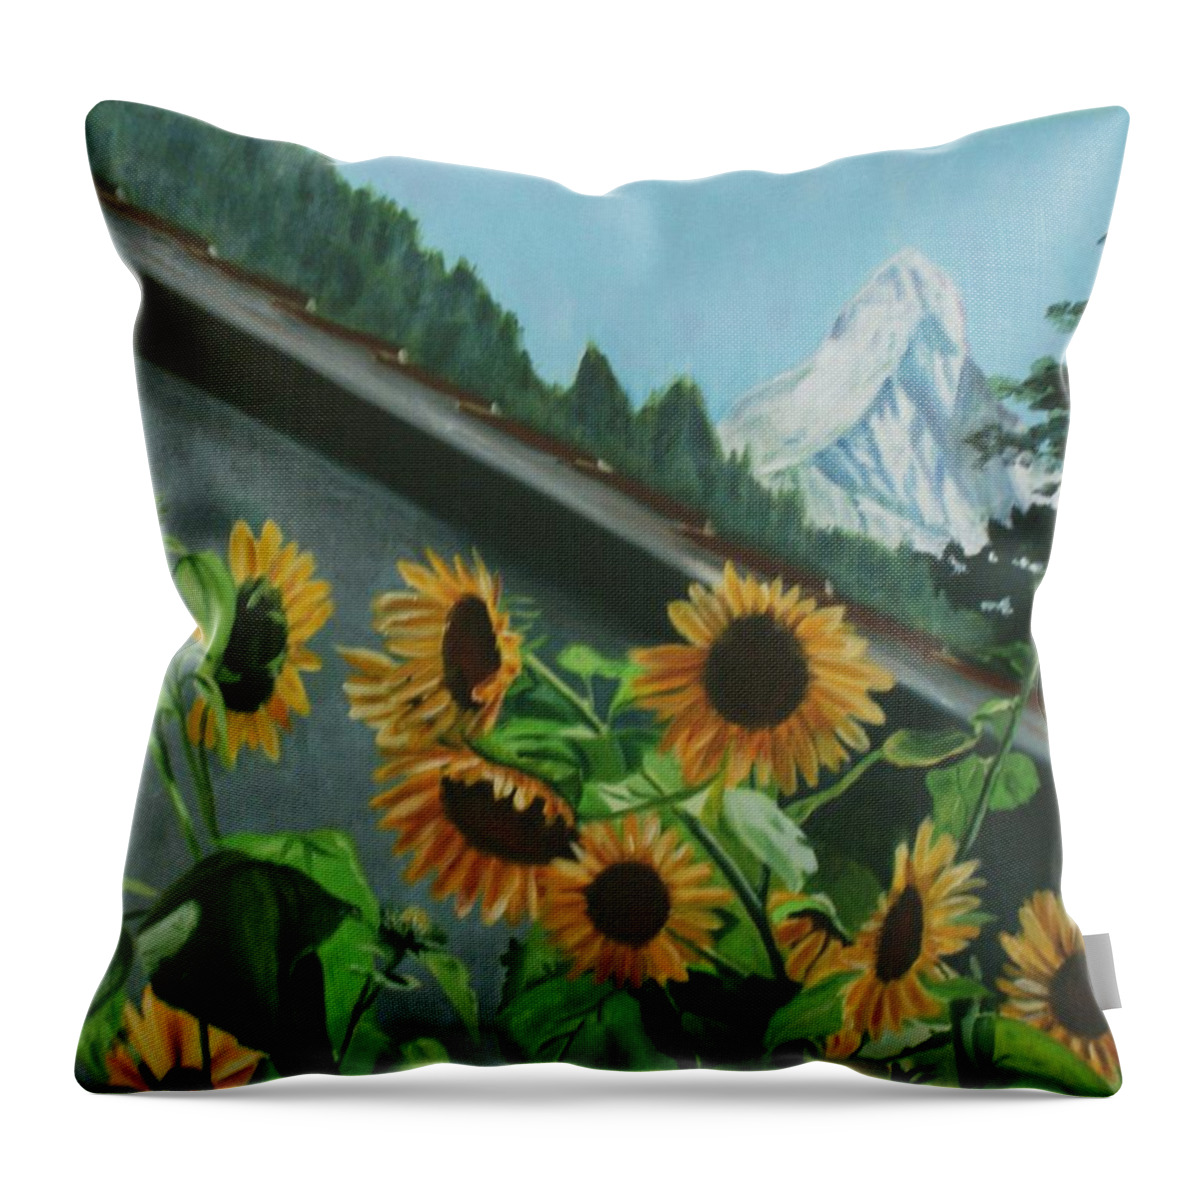 Alpine Throw Pillow featuring the painting Alpine Delight by Jill Ciccone Pike